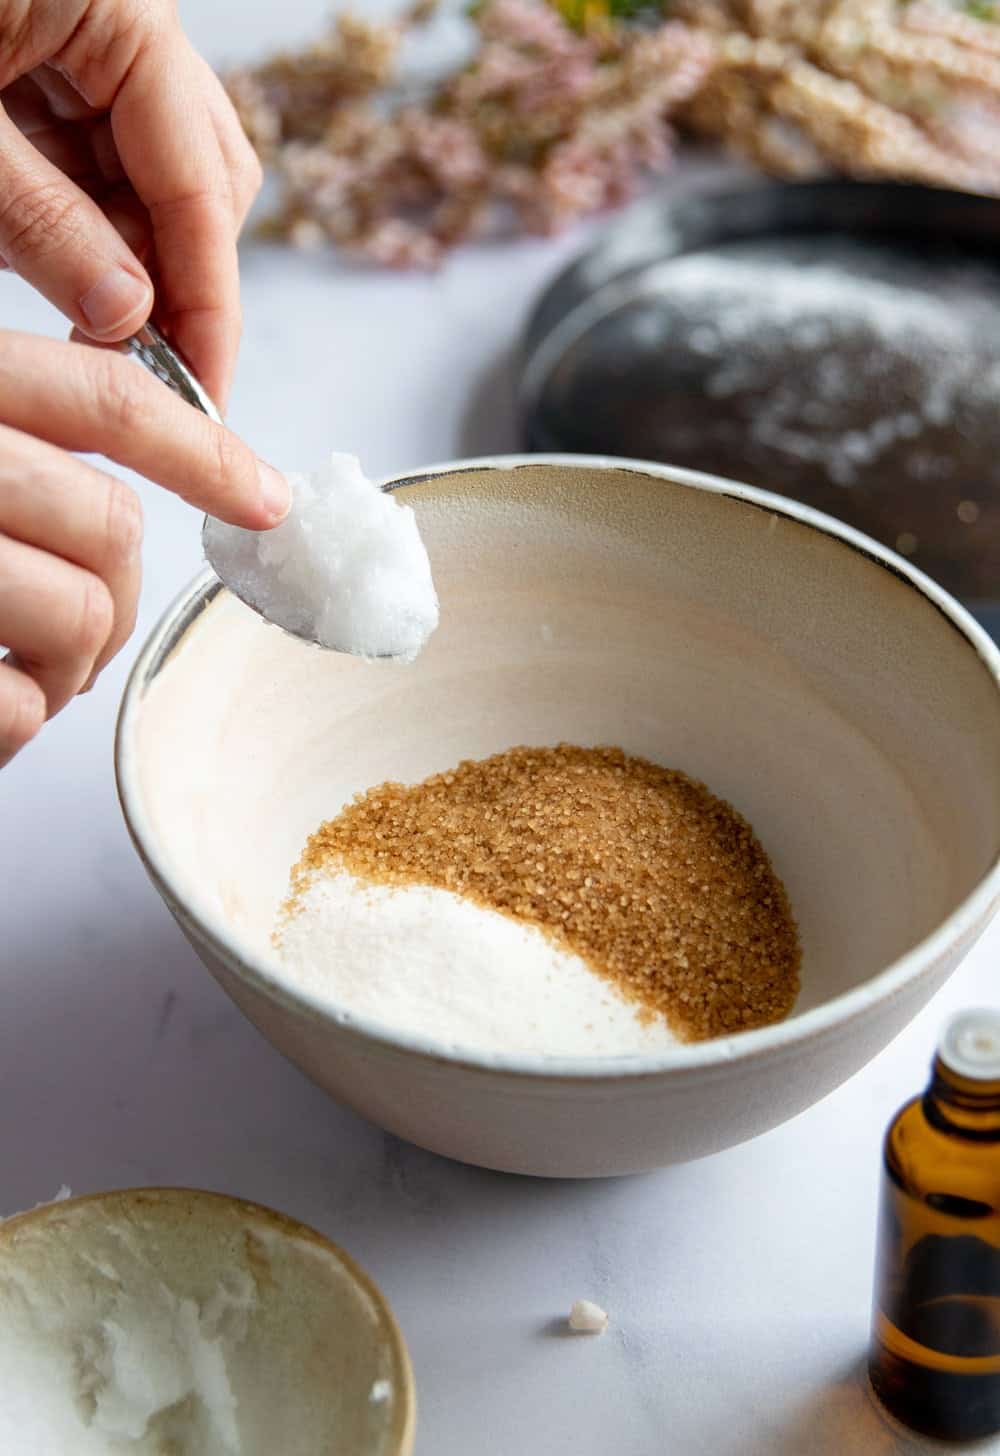 Combine the sugar and oils in a bowl for a whipped sugar scrub